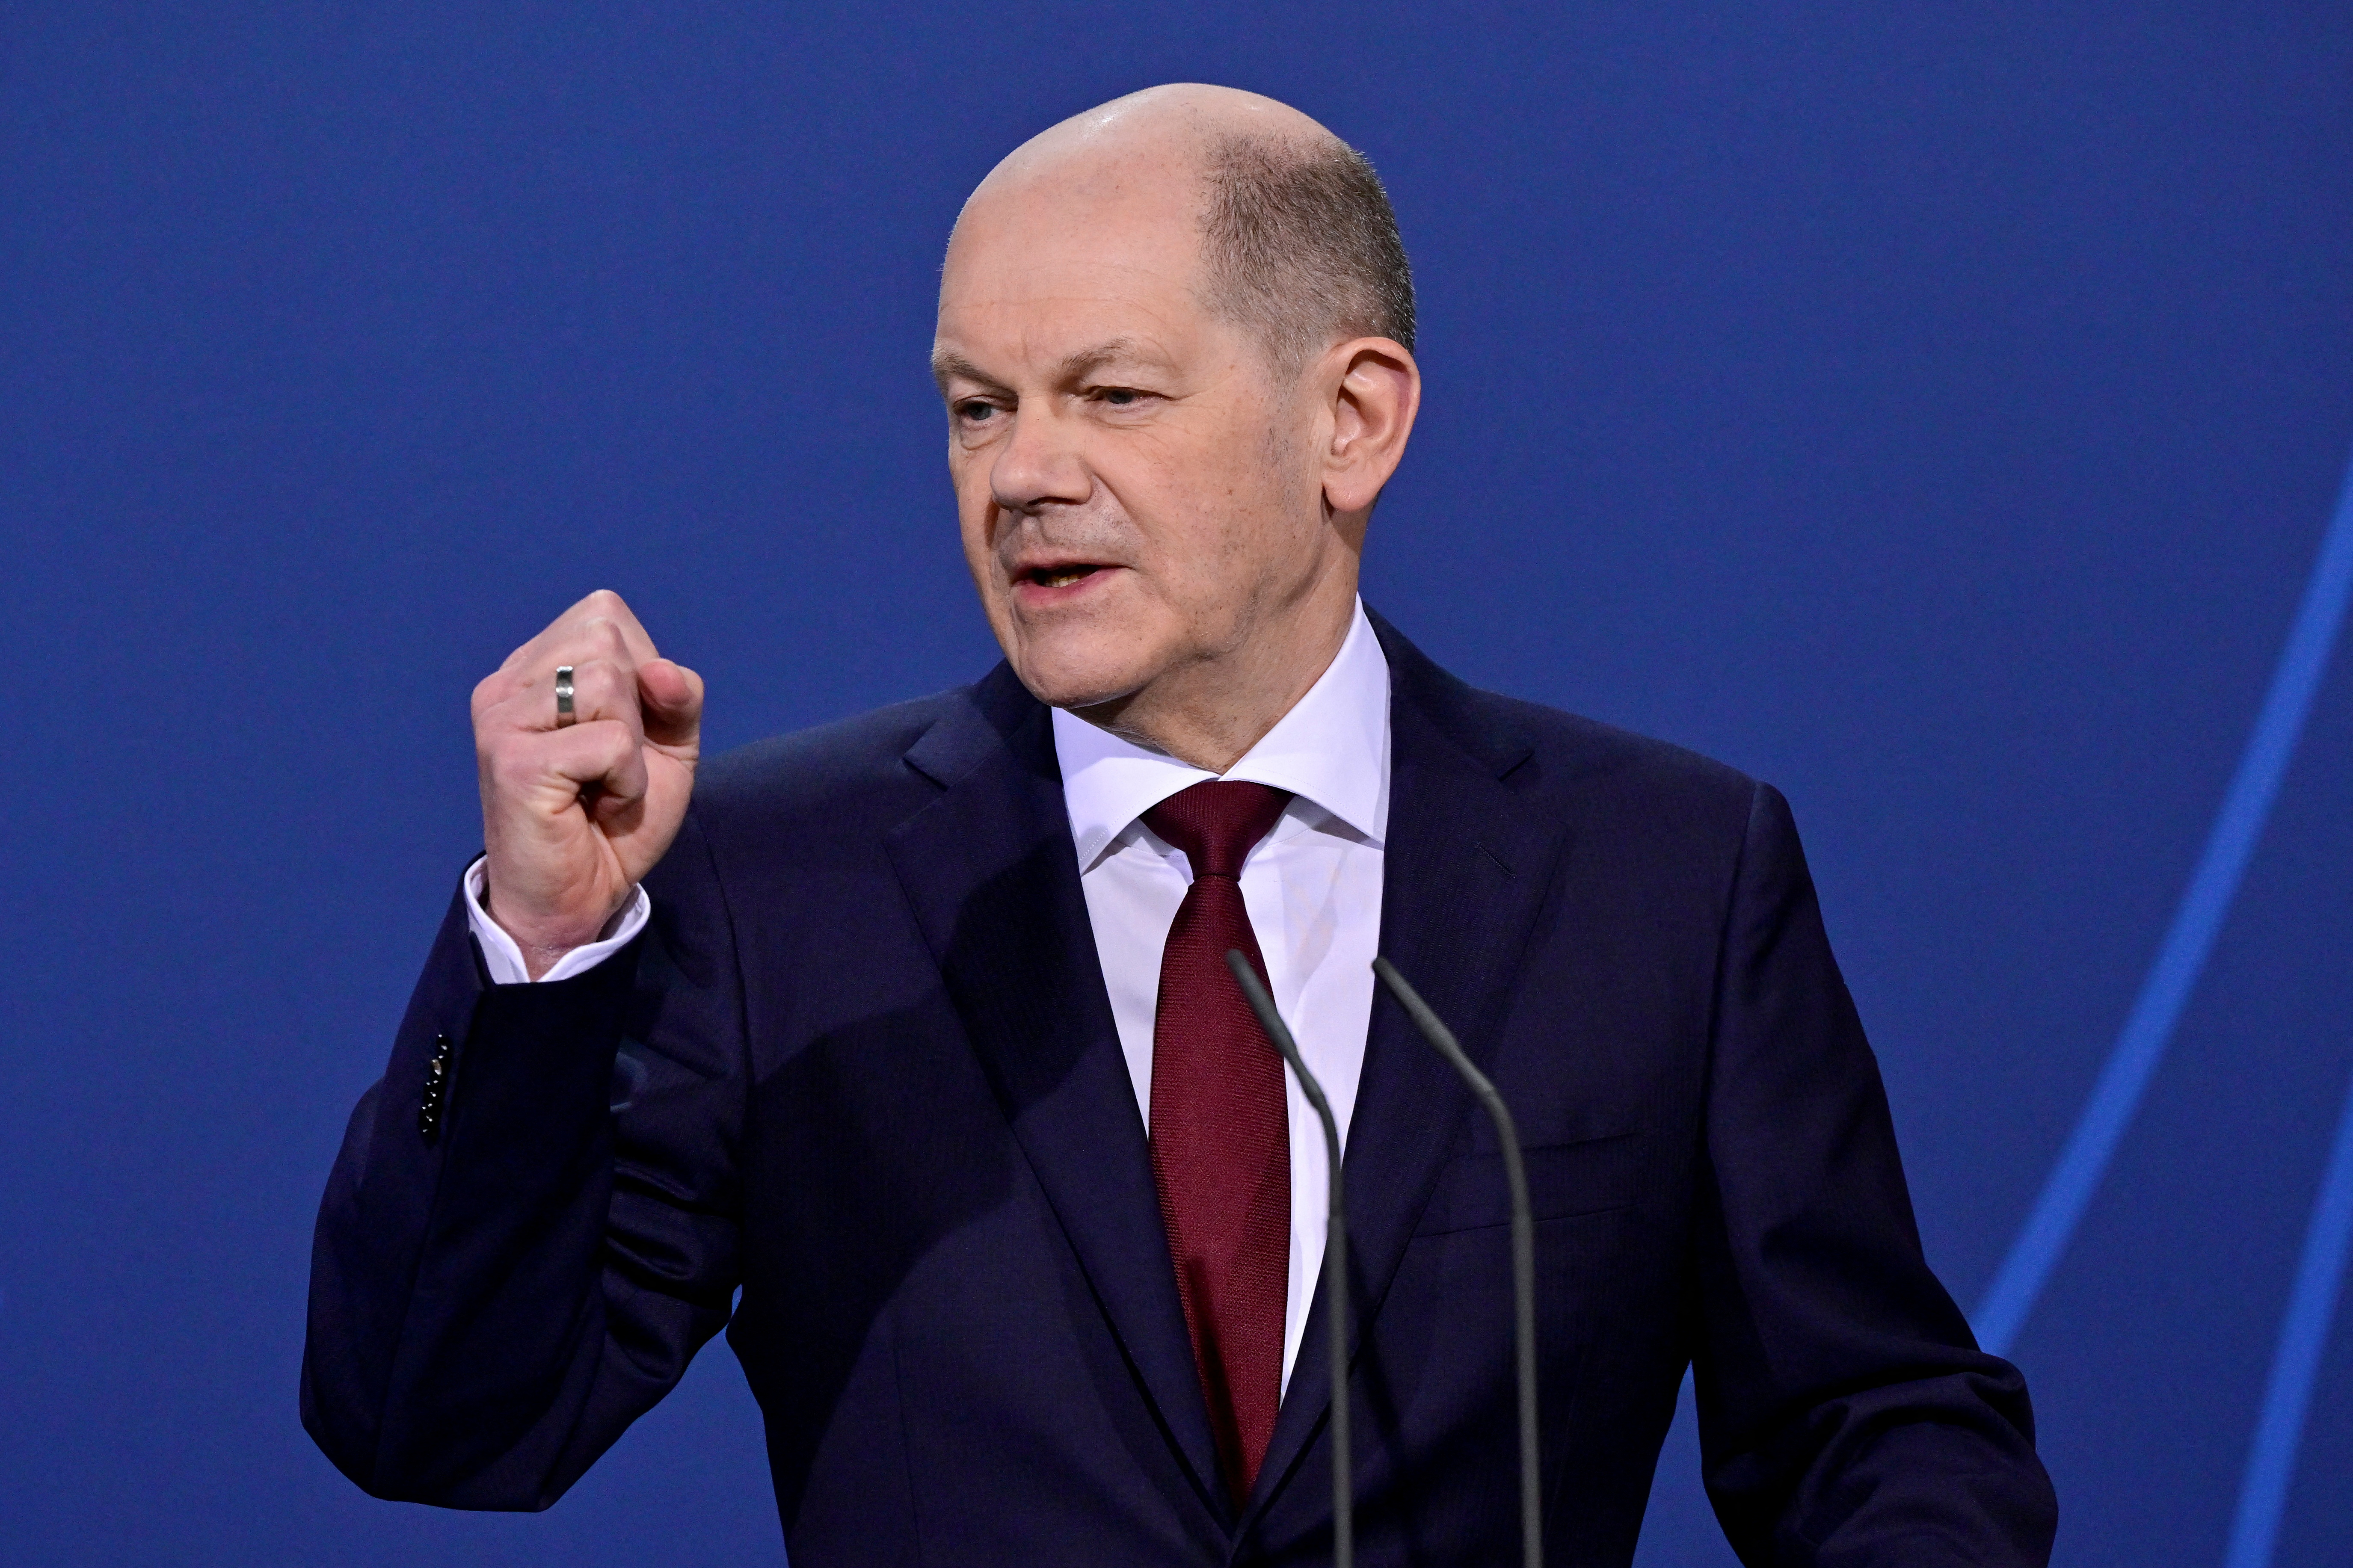 Finland's Prime Minister Sanna Marin and German Chancellor Olaf Scholz address a news conference in Berlin